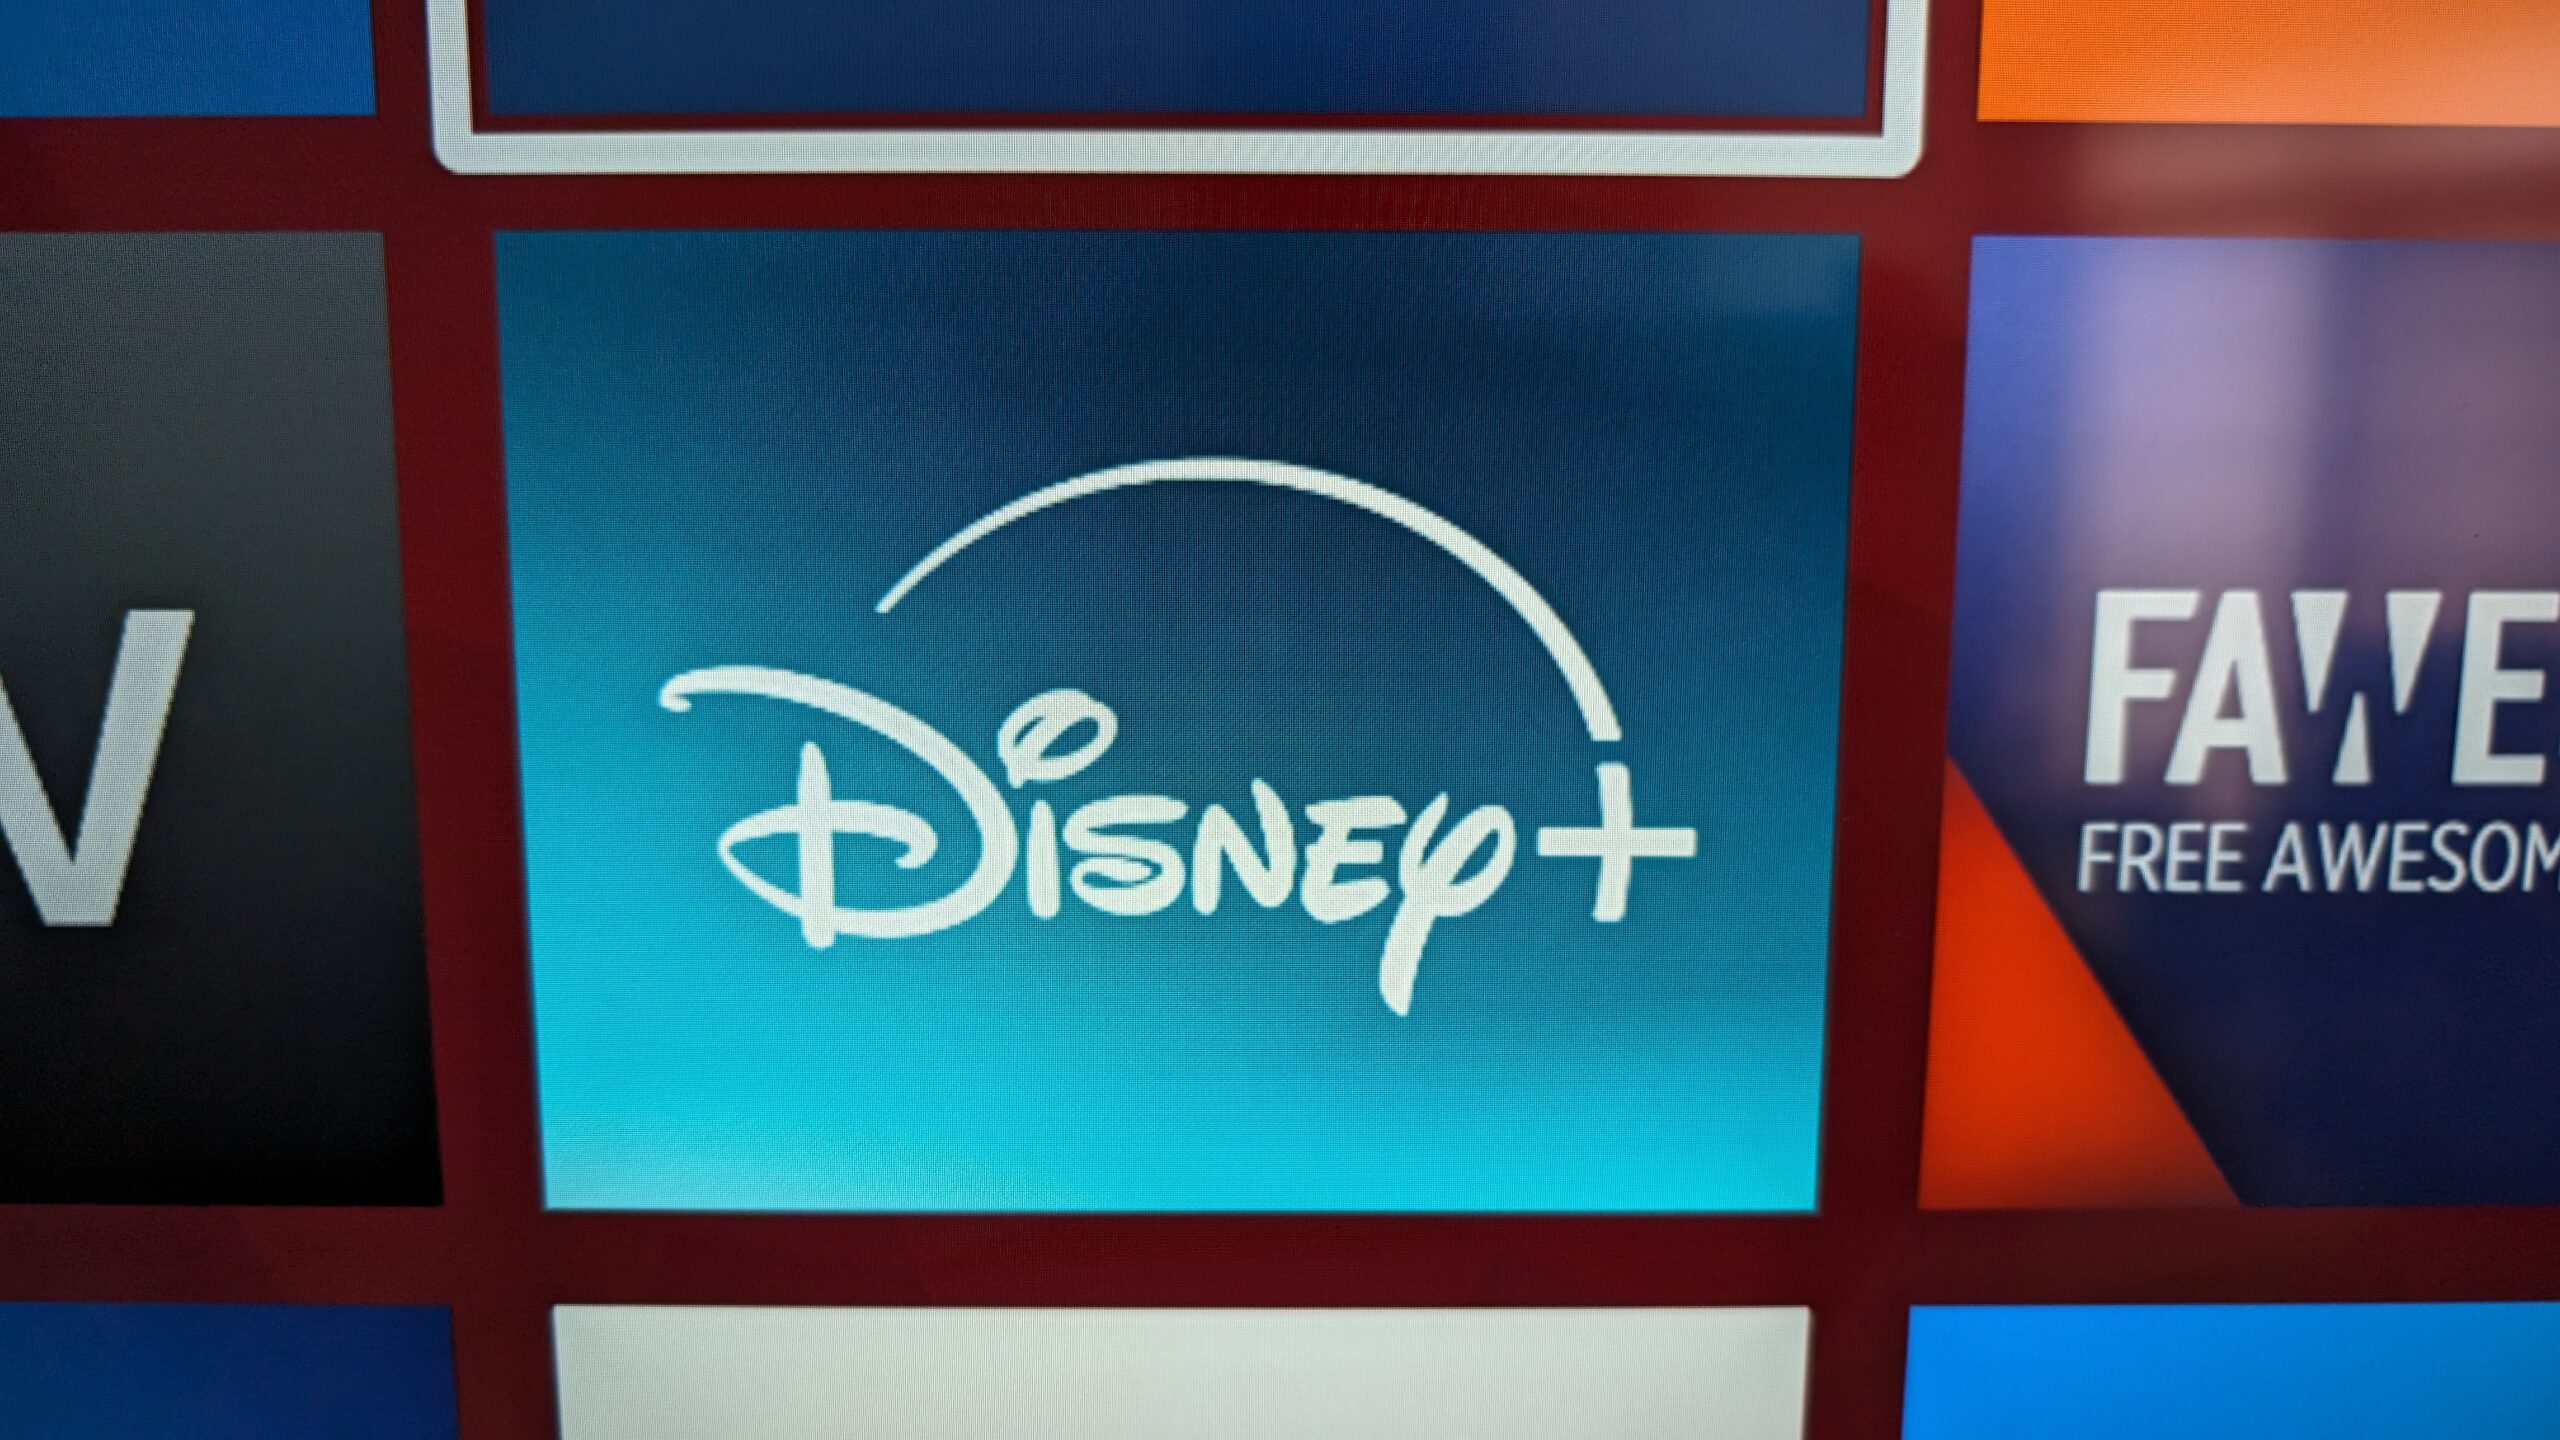 Disney+ Updates Its App With a New Look Ahead Of It Adding Hulu Later This Month